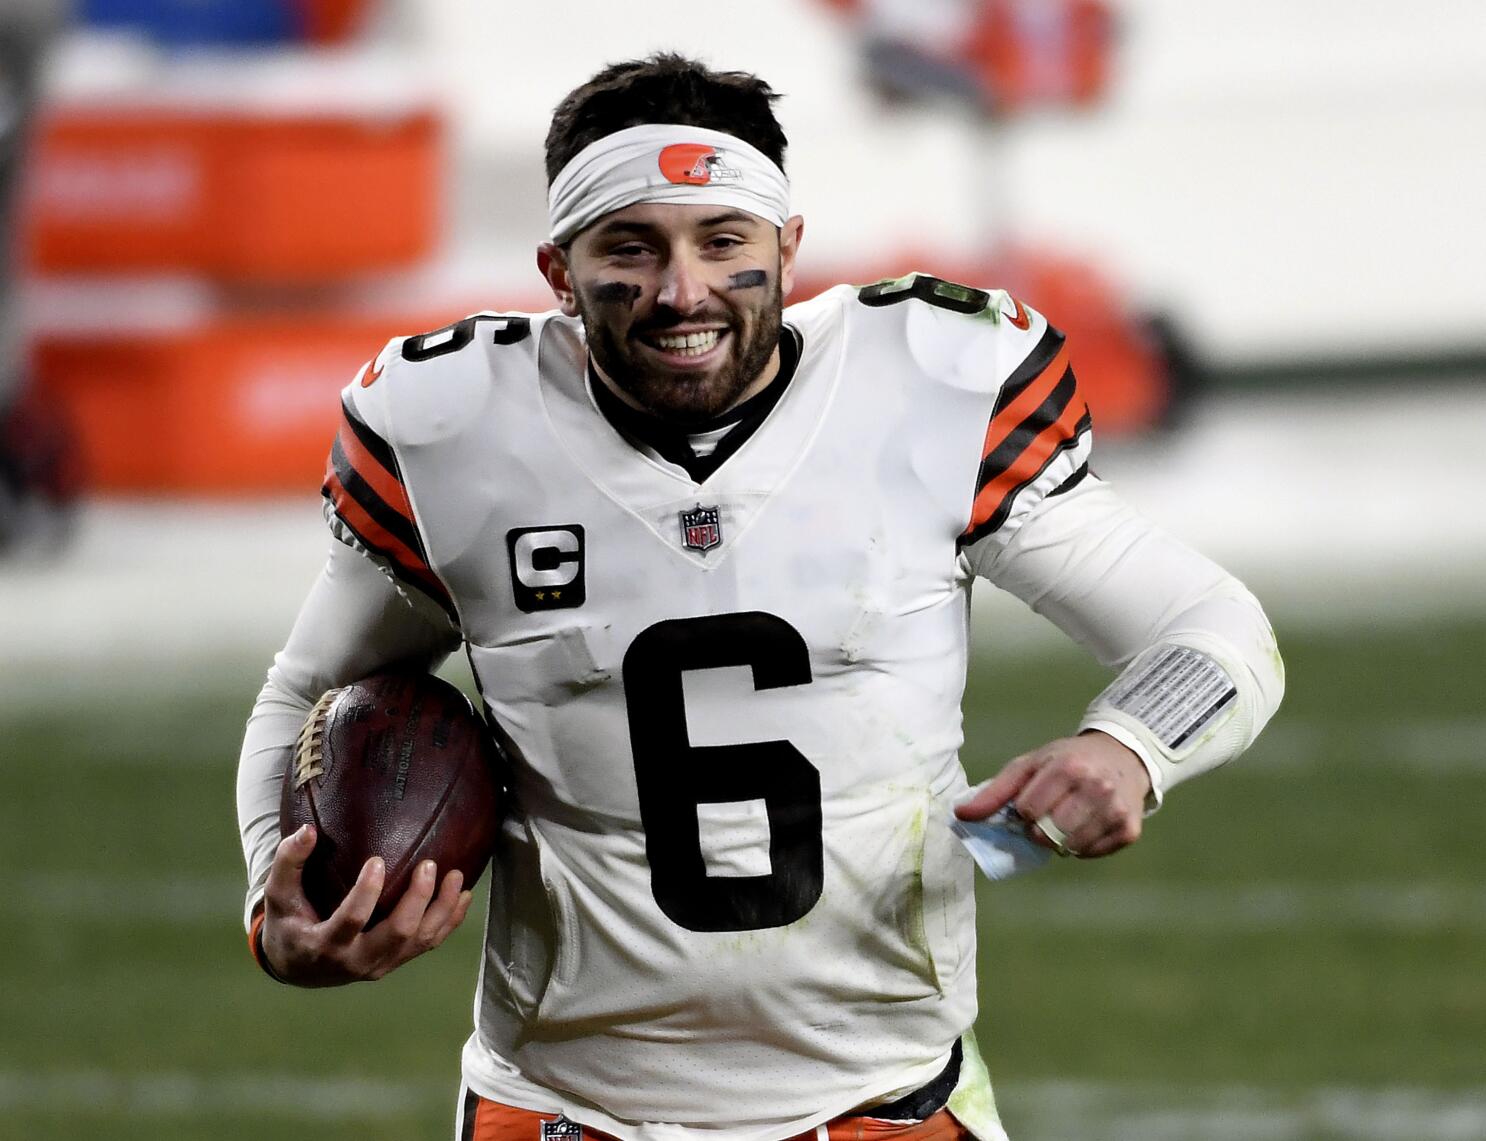 Mature Baker Mayfield has Super Bowl expectations for Cleveland Browns